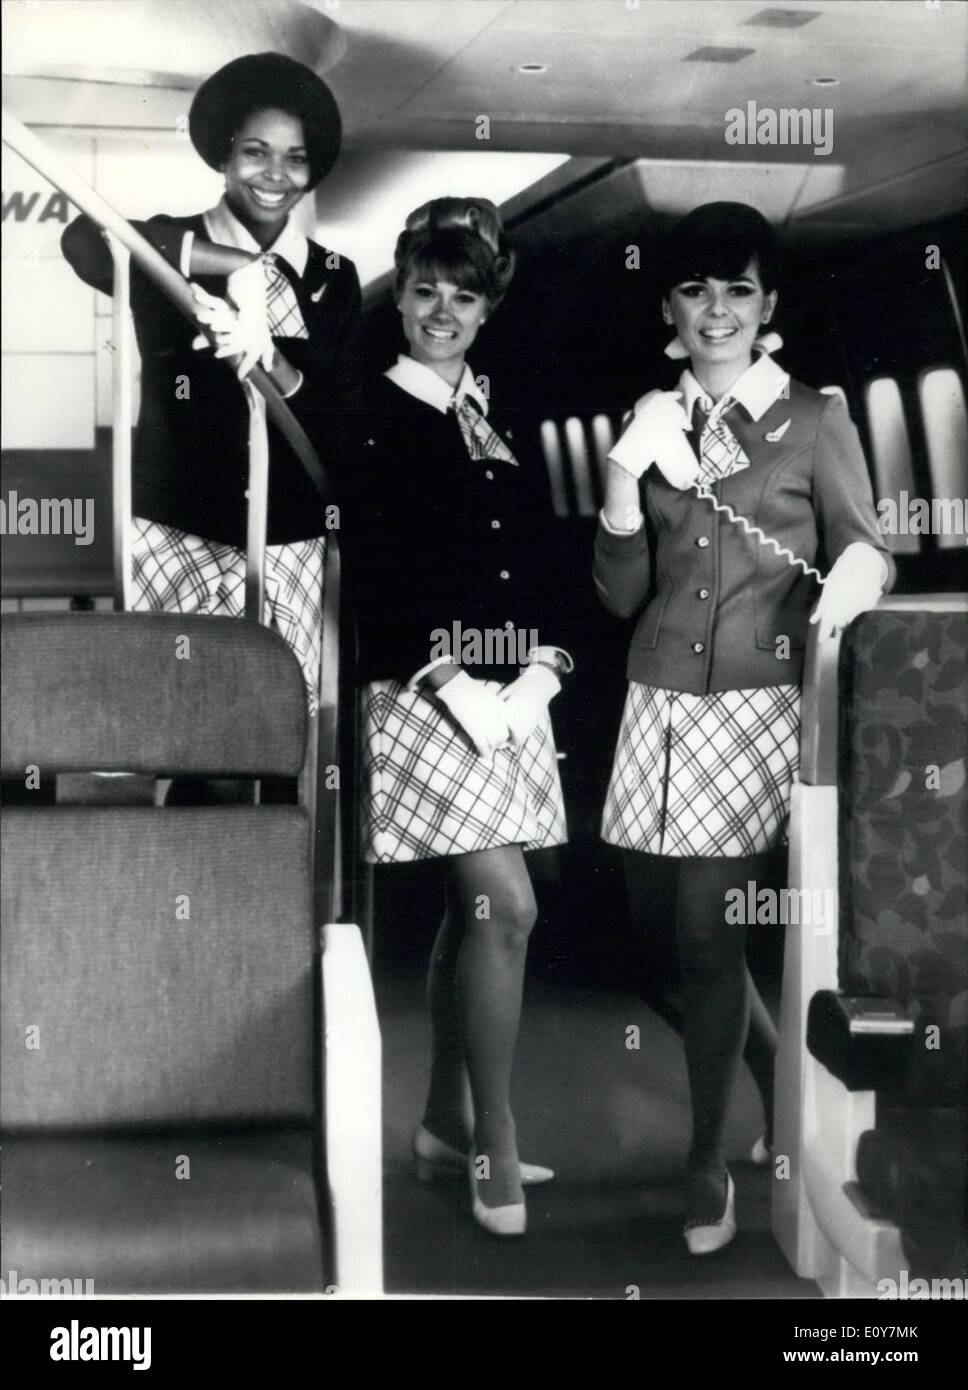 Apr. 04, 1969 - Summer Uniforms Or T.W.A. Hostesses: Photo shows. three charming T.W.A. hostesses displaying the new summer uniform on board the first Boeing 747. Stock Photo